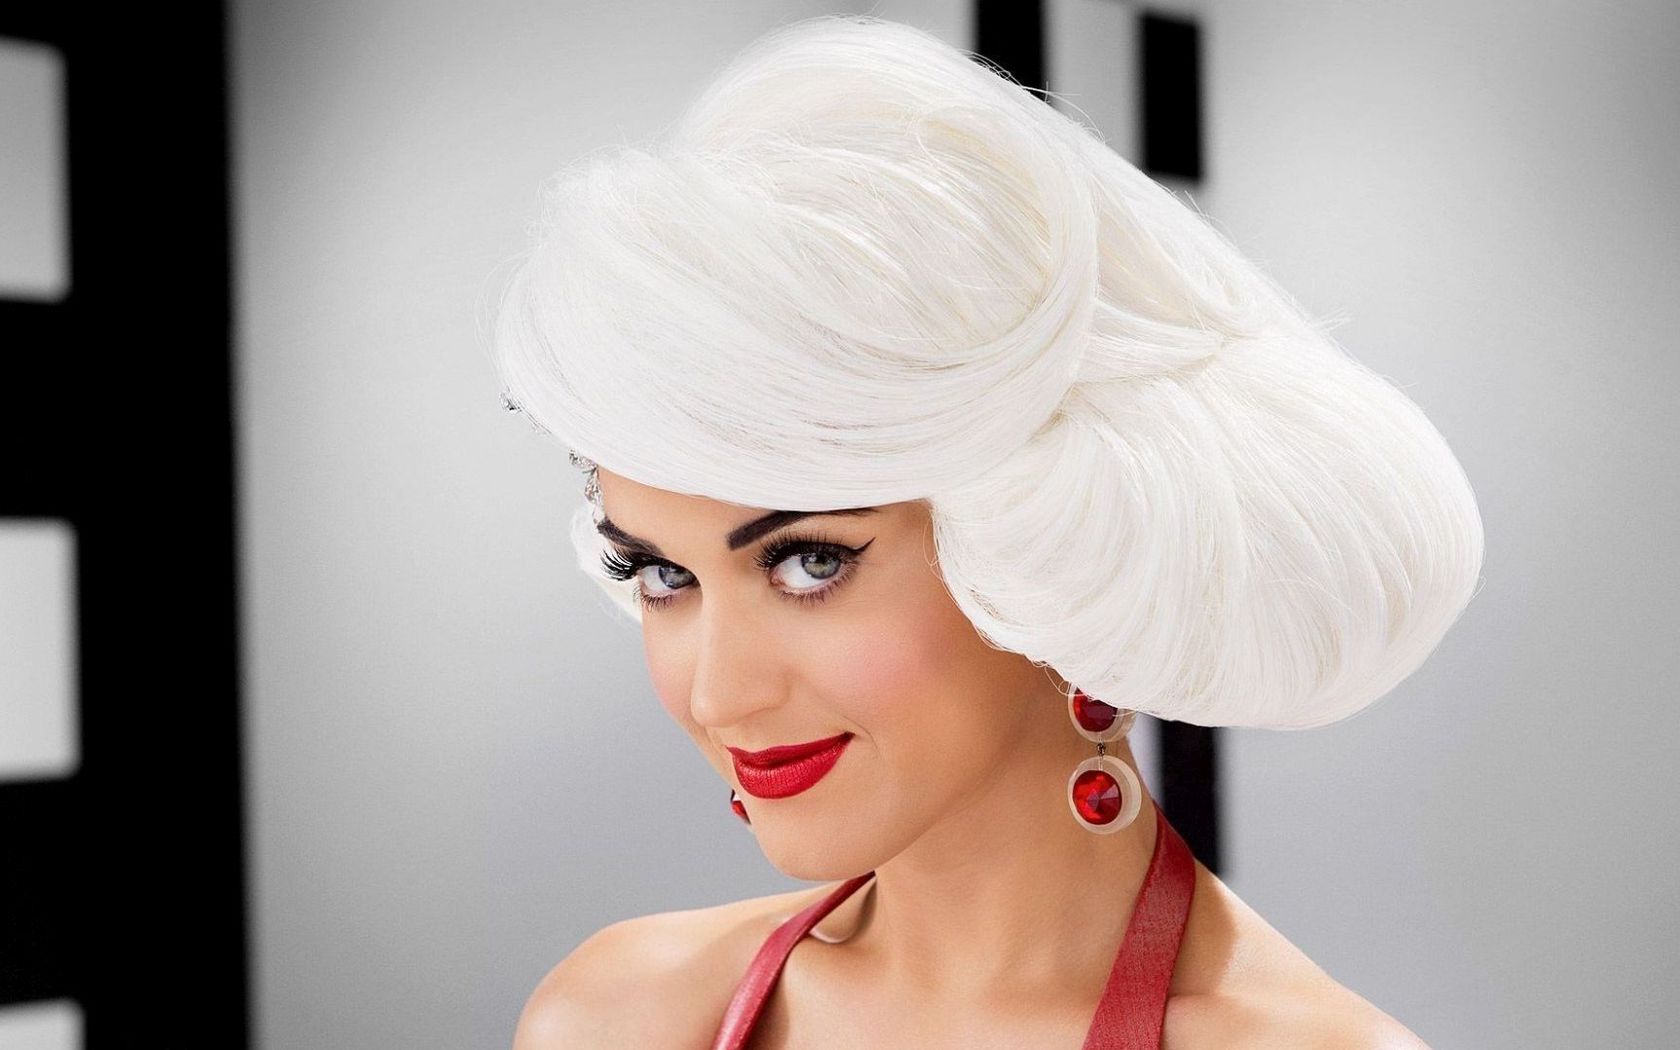 Katy Perry With A White Wig Wallpaper